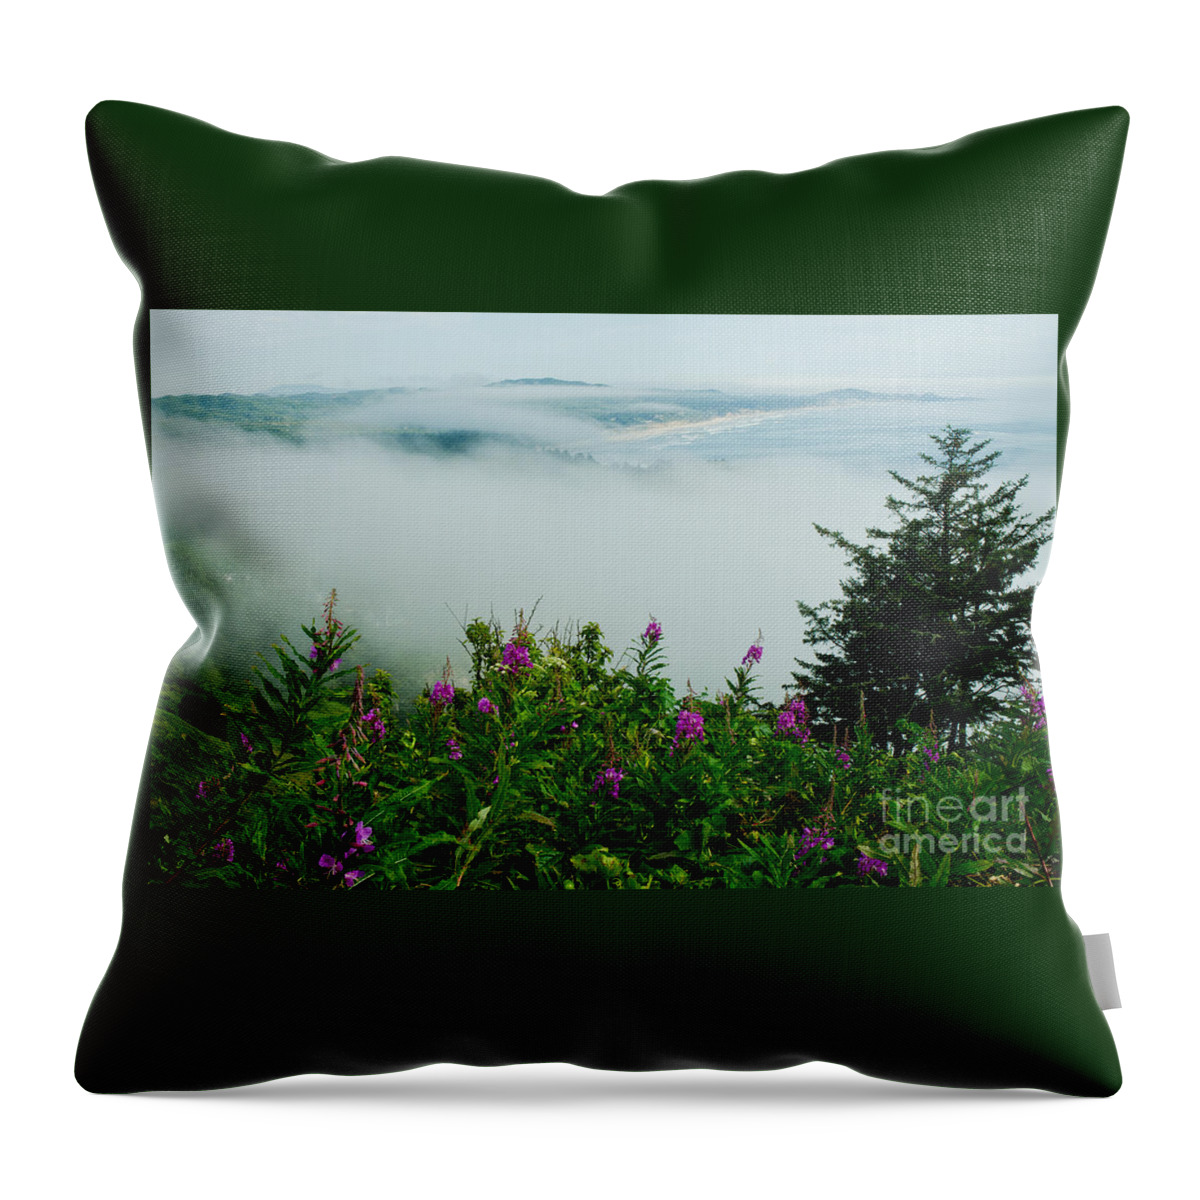 Oregon Throw Pillow featuring the photograph Cape Foulweather Seascape by Nick Boren